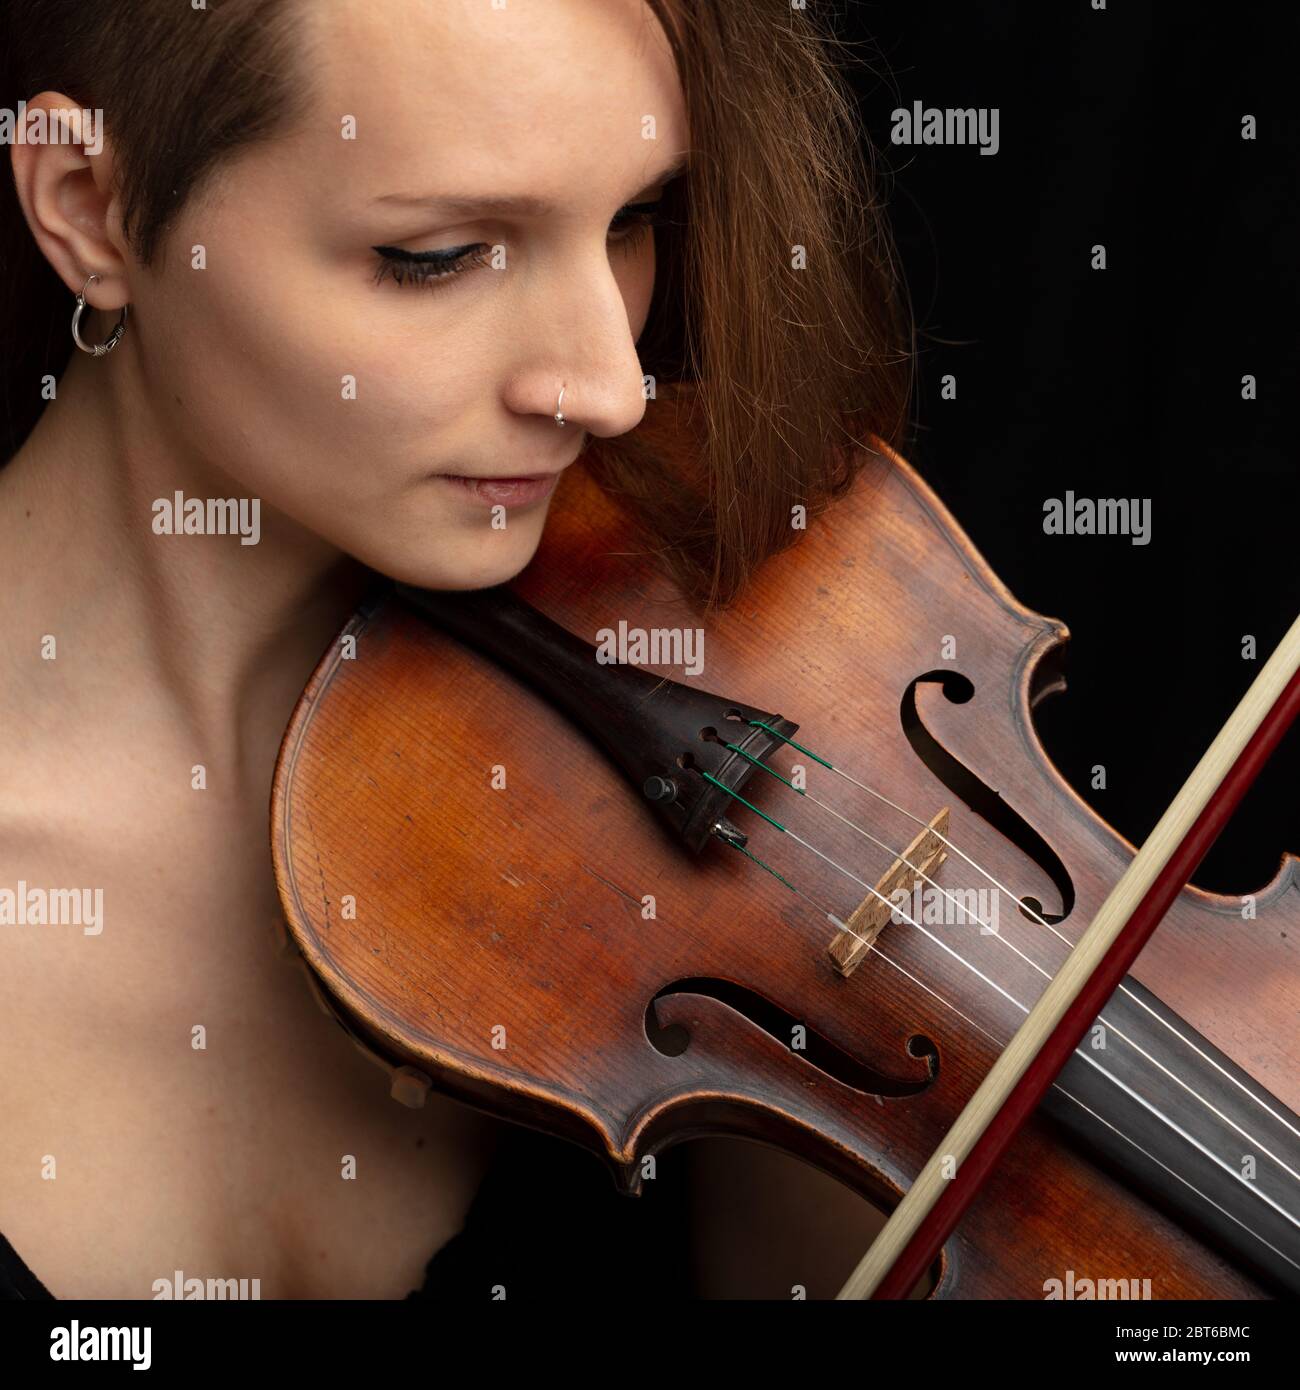 Woman with pierced nose playing a classical violin during a live performance or recital in close up on her face and instrument Stock Photo